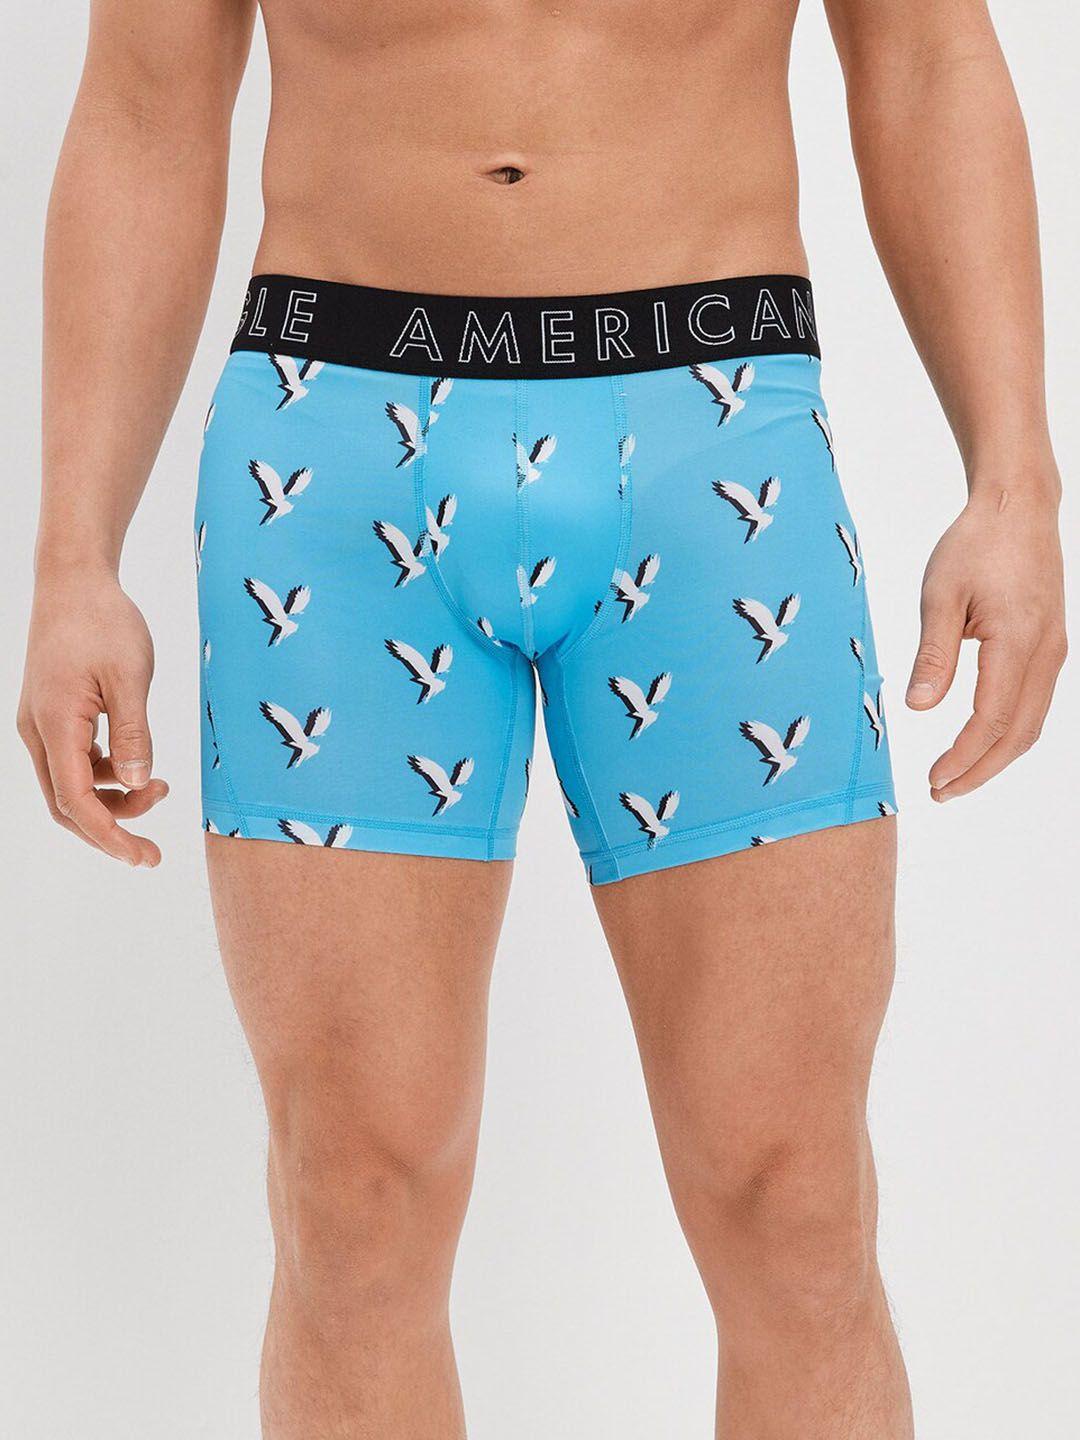 american eagle outfitters shadow eagle printed boxer-style brief wes0231452423